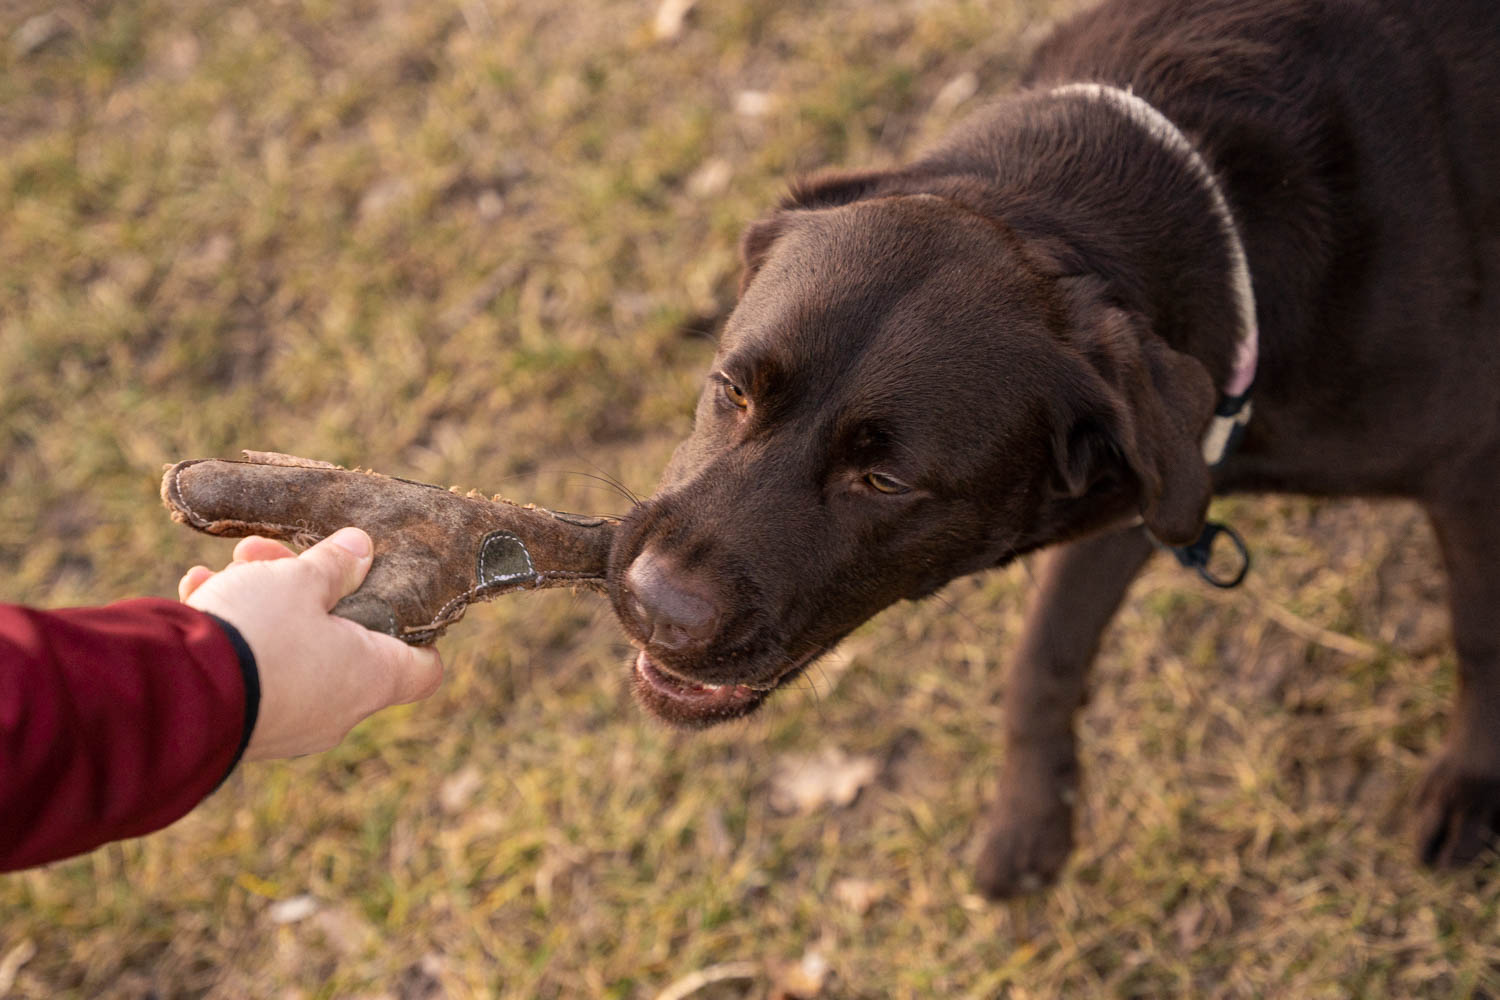 With double recall, as the name suggests, your dog has two signals to be called back. The first command is a reorientation signal or anchor signal and the second is the recall signal. This picture shows a dog being rewarded with a toy during training.